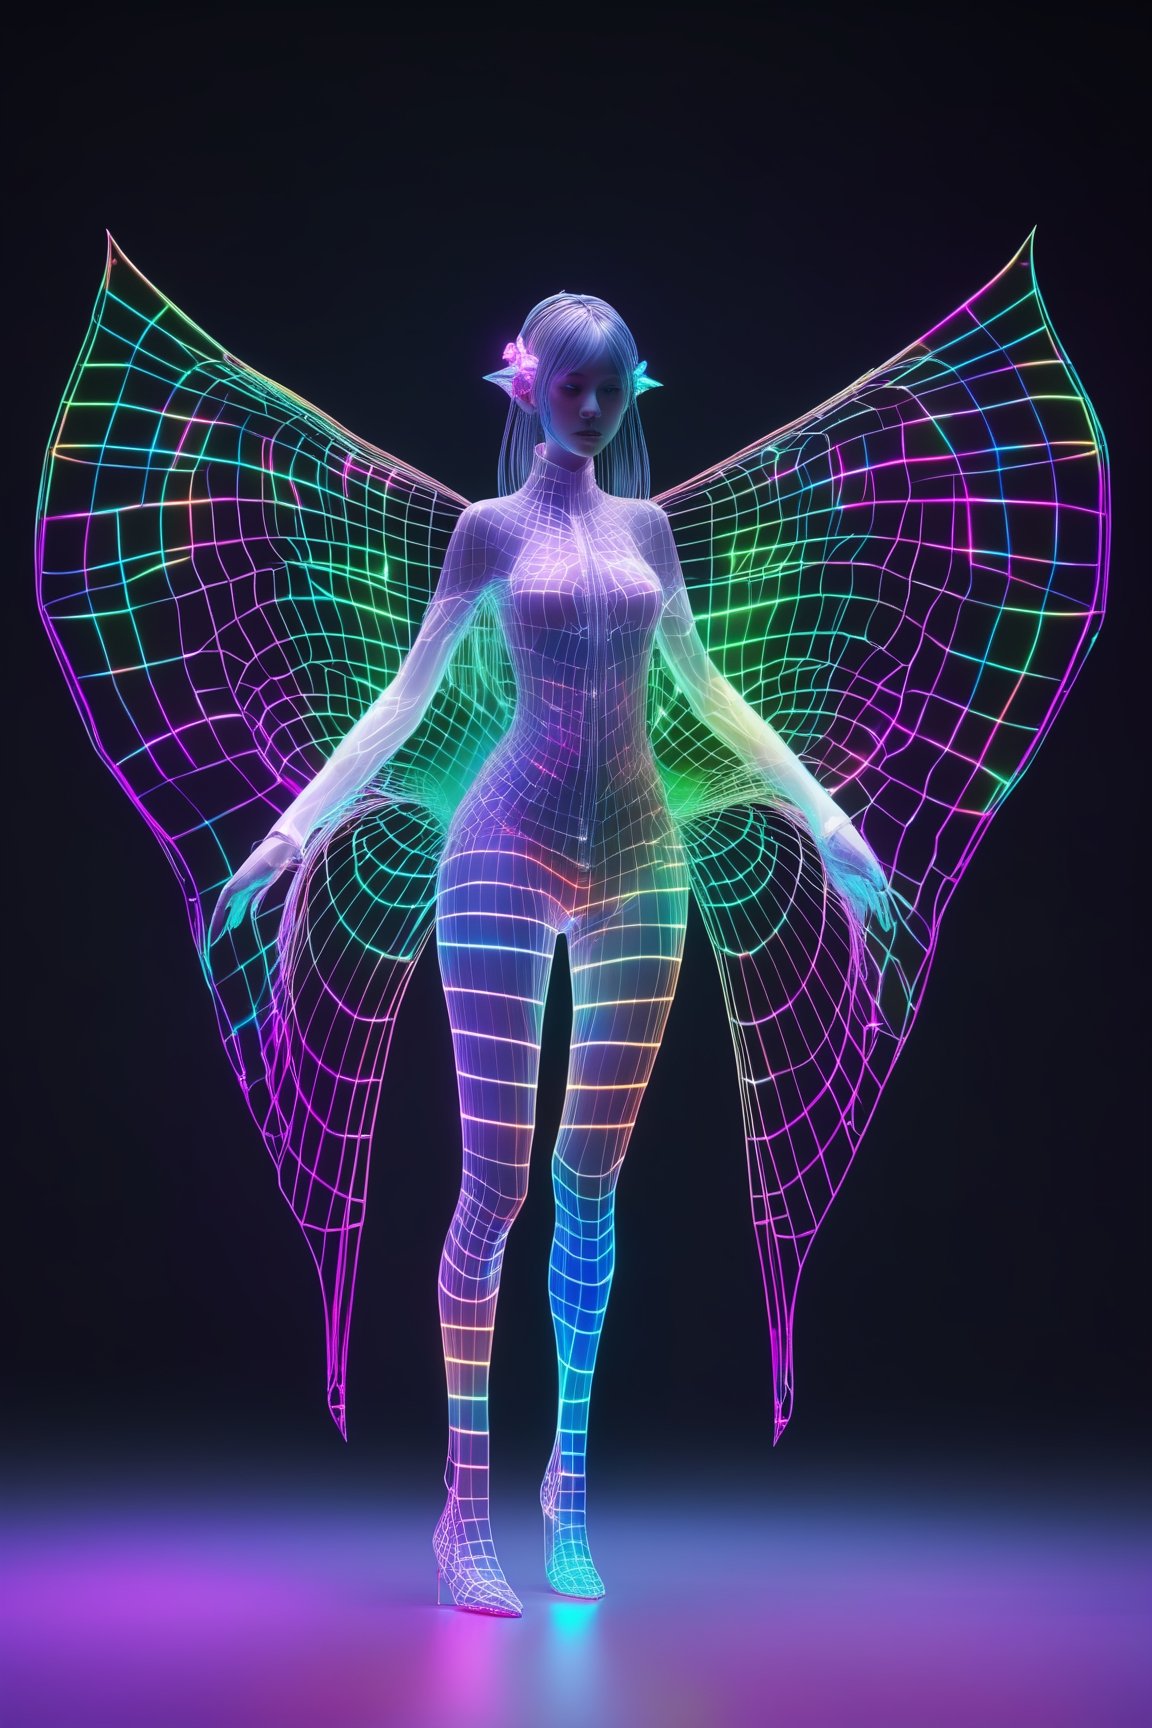 FULL BODY SHOT, 1girl, ((virtual disintegration wireframe rgb:1.32)), (matte skin:1.1)
translucent, transparent, reflection, colorfull, colored, (girl with butterfly wings:0.3)
iridescence holographic Clothing, magic